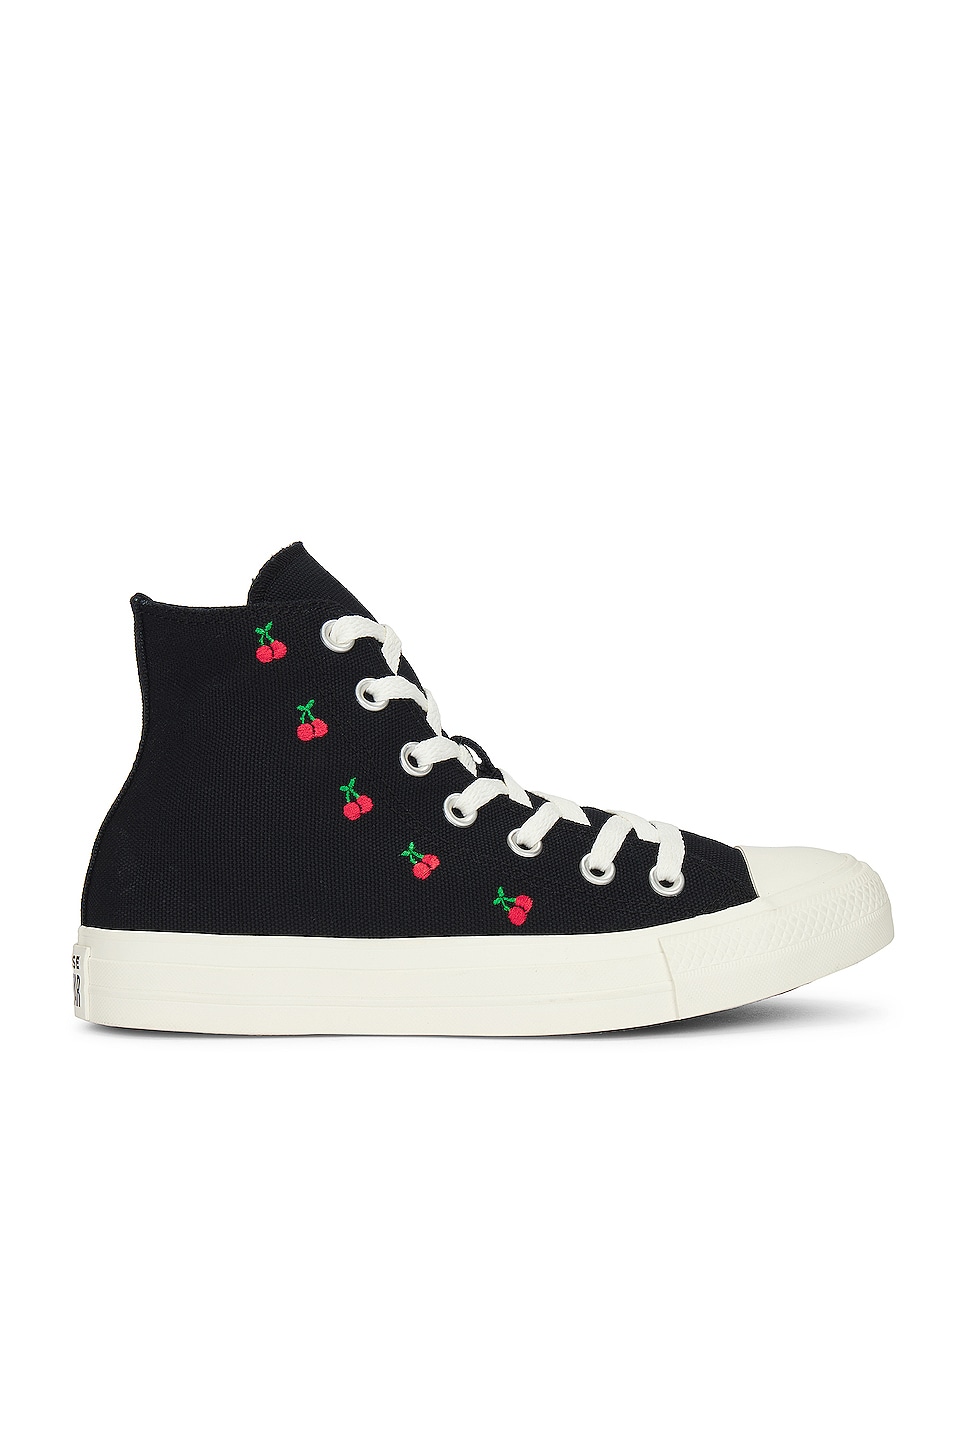 Image 1 of Converse Ctas Cherry On in Black & Red